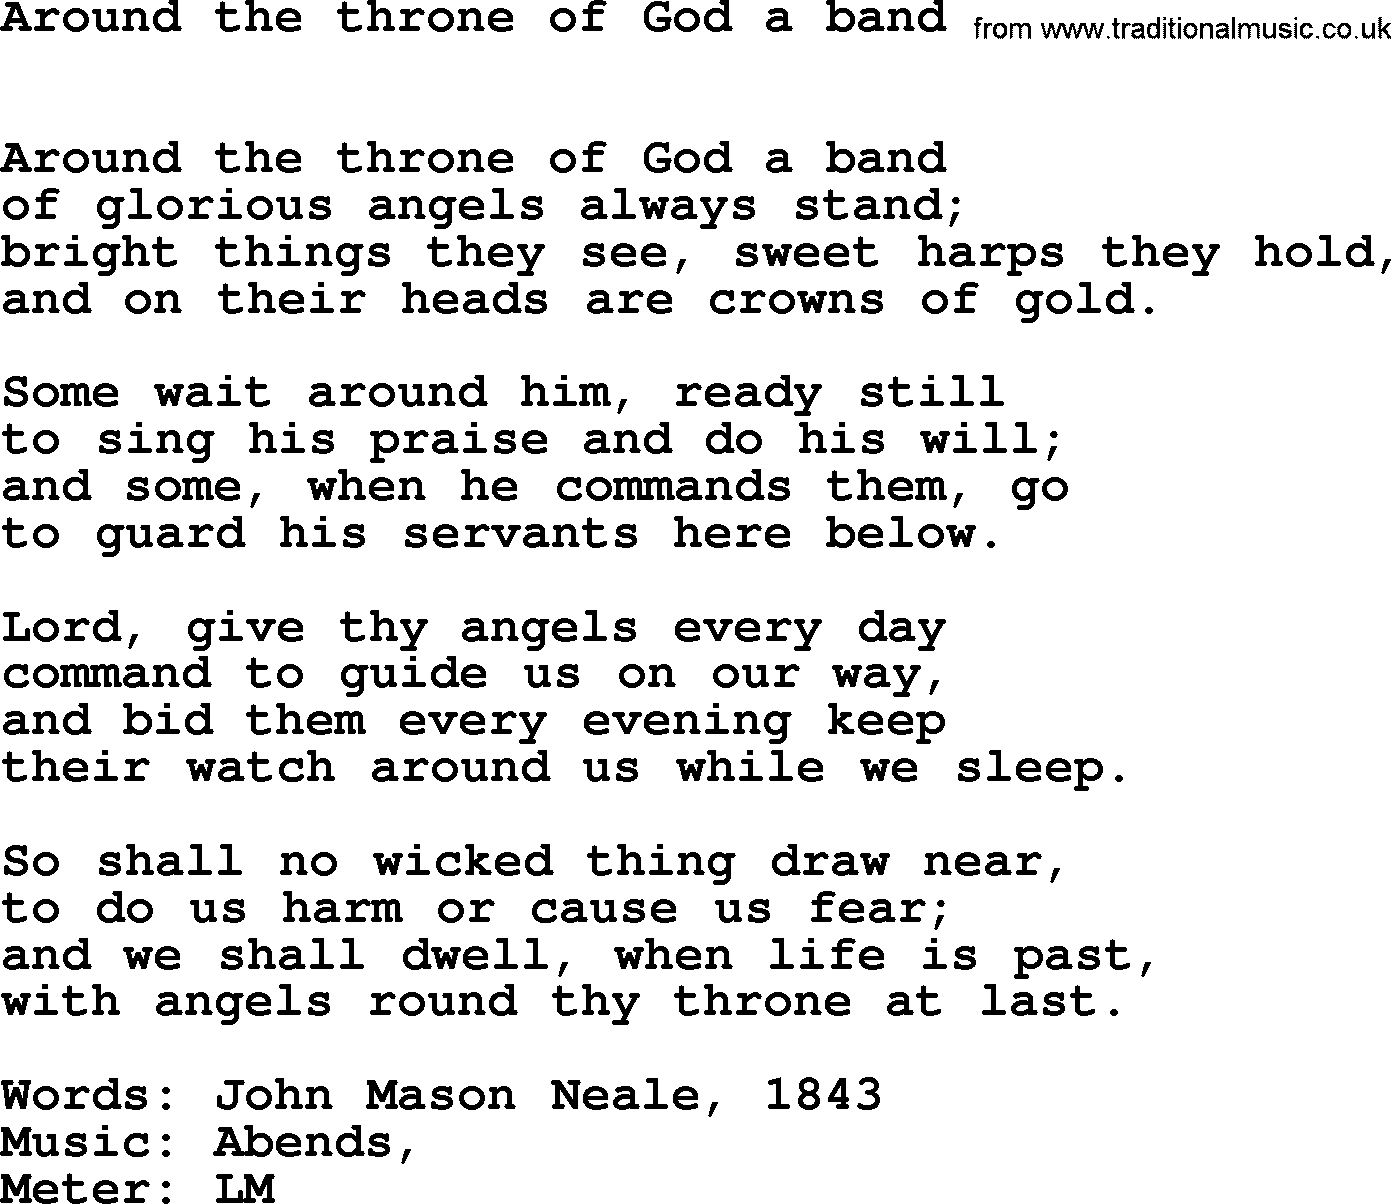 Book of Common Praise Hymn: Around The Throne Of God A Band.txt lyrics with midi music